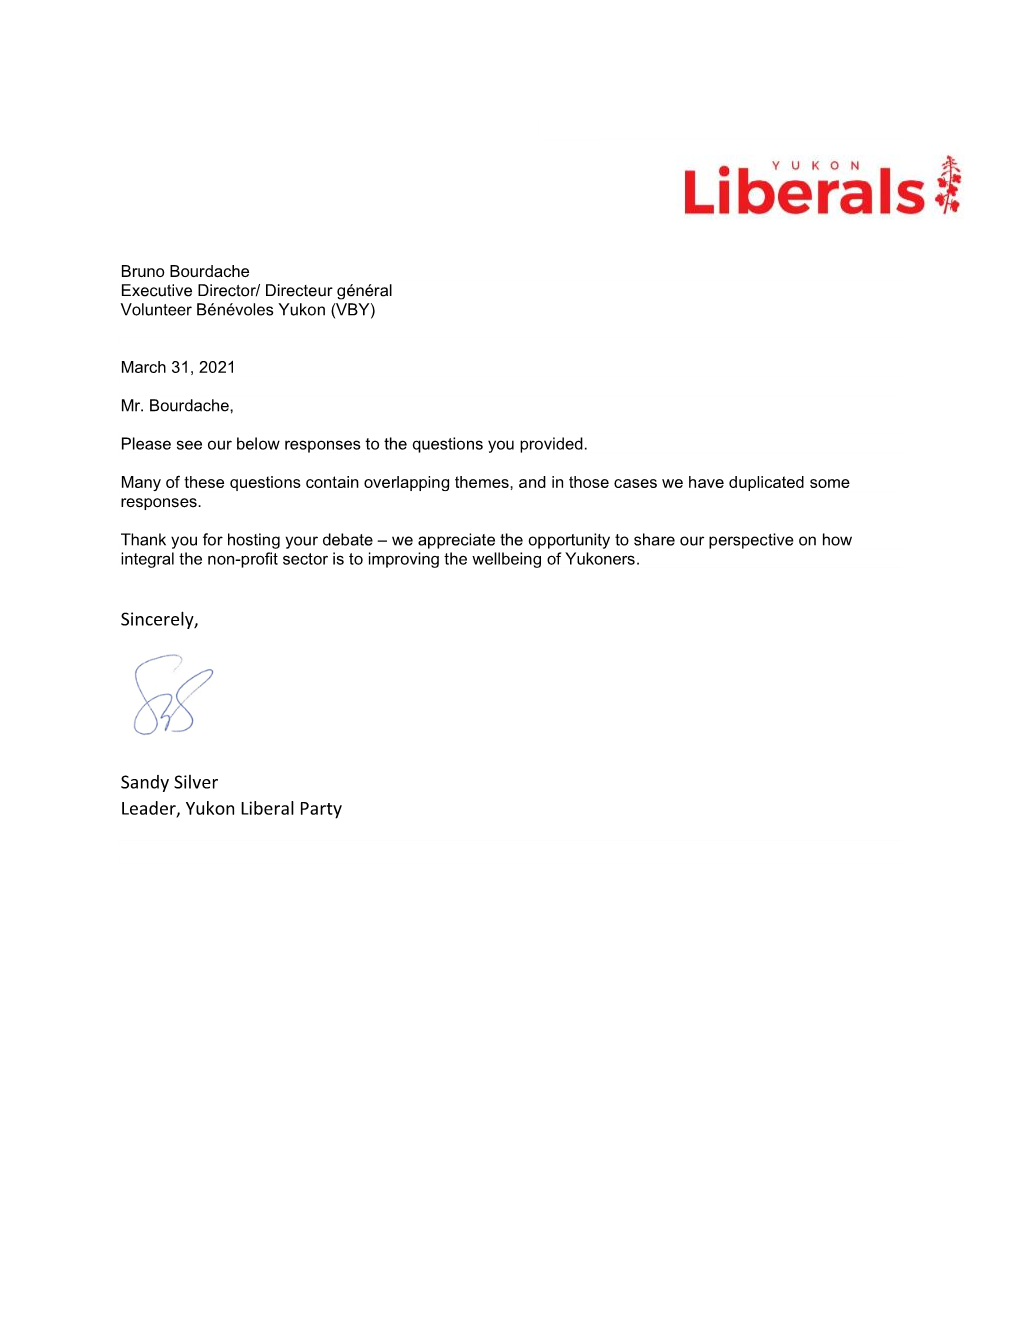 Sincerely, Sandy Silver Leader, Yukon Liberal Party